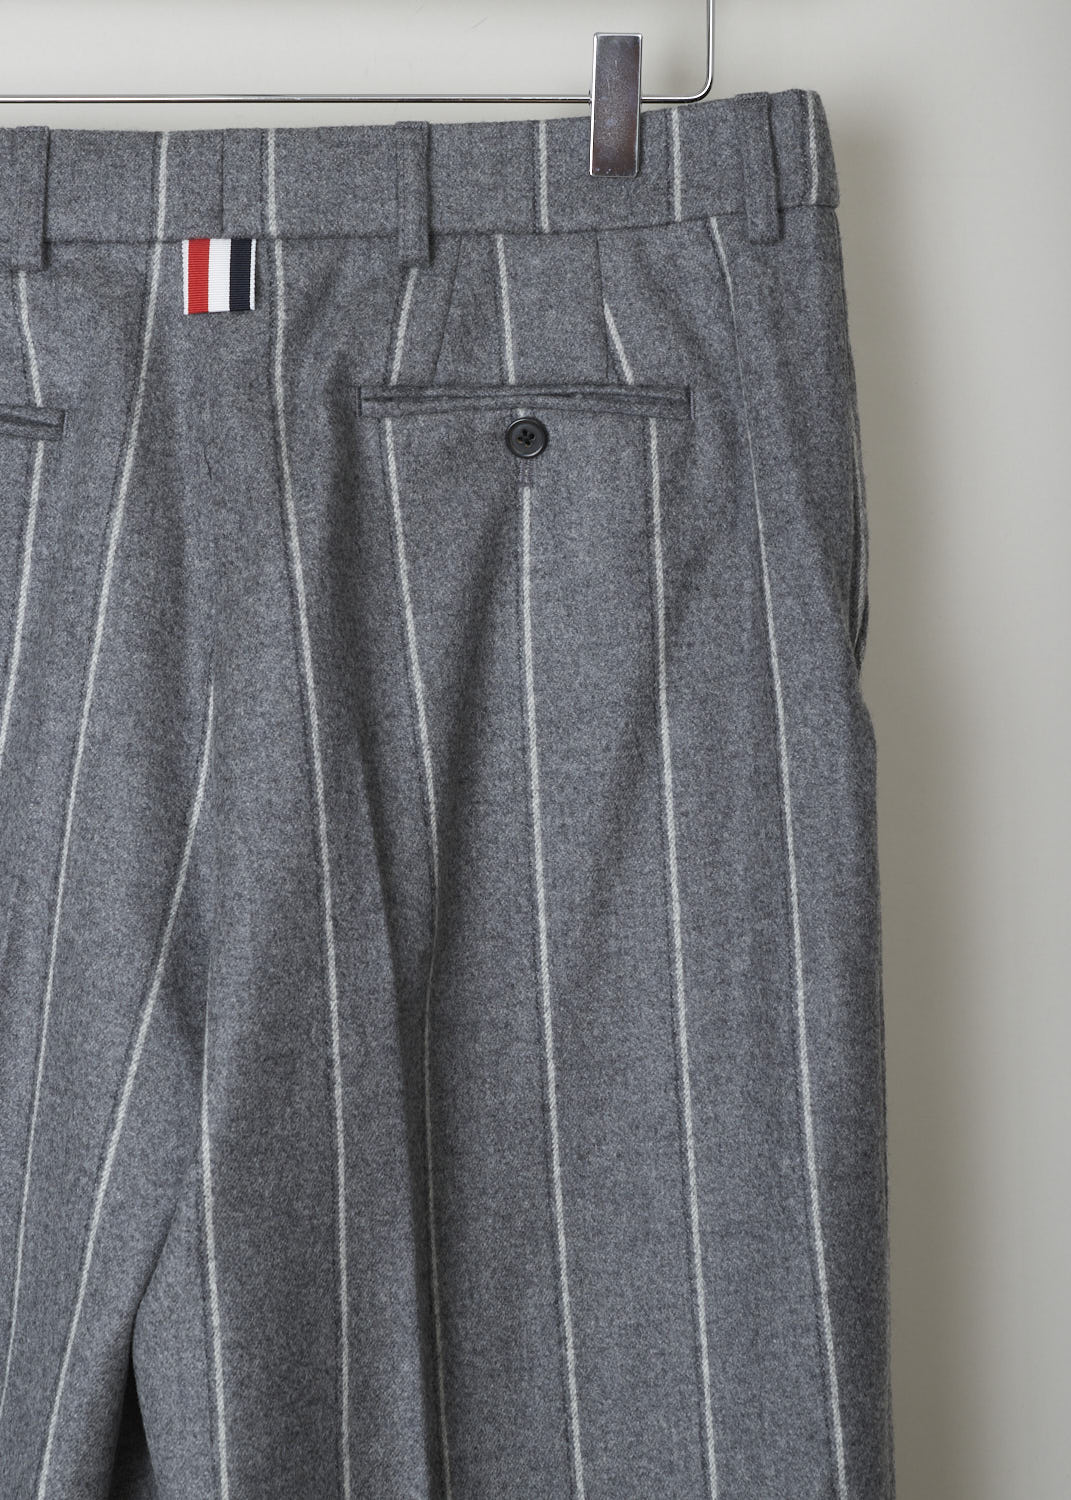 THOM BROWNE, WOOL FLANNEL STRIPED TROUSERS, FTC160A_05019_035_MED_GREY, Grey, Print, Detail, These heather grey, striped trousers have belt loops and a clap a zip closure They feature slanted pockets in the front and buttoned welt pockets in the back. The pant legs end in broad, folded hem. 
